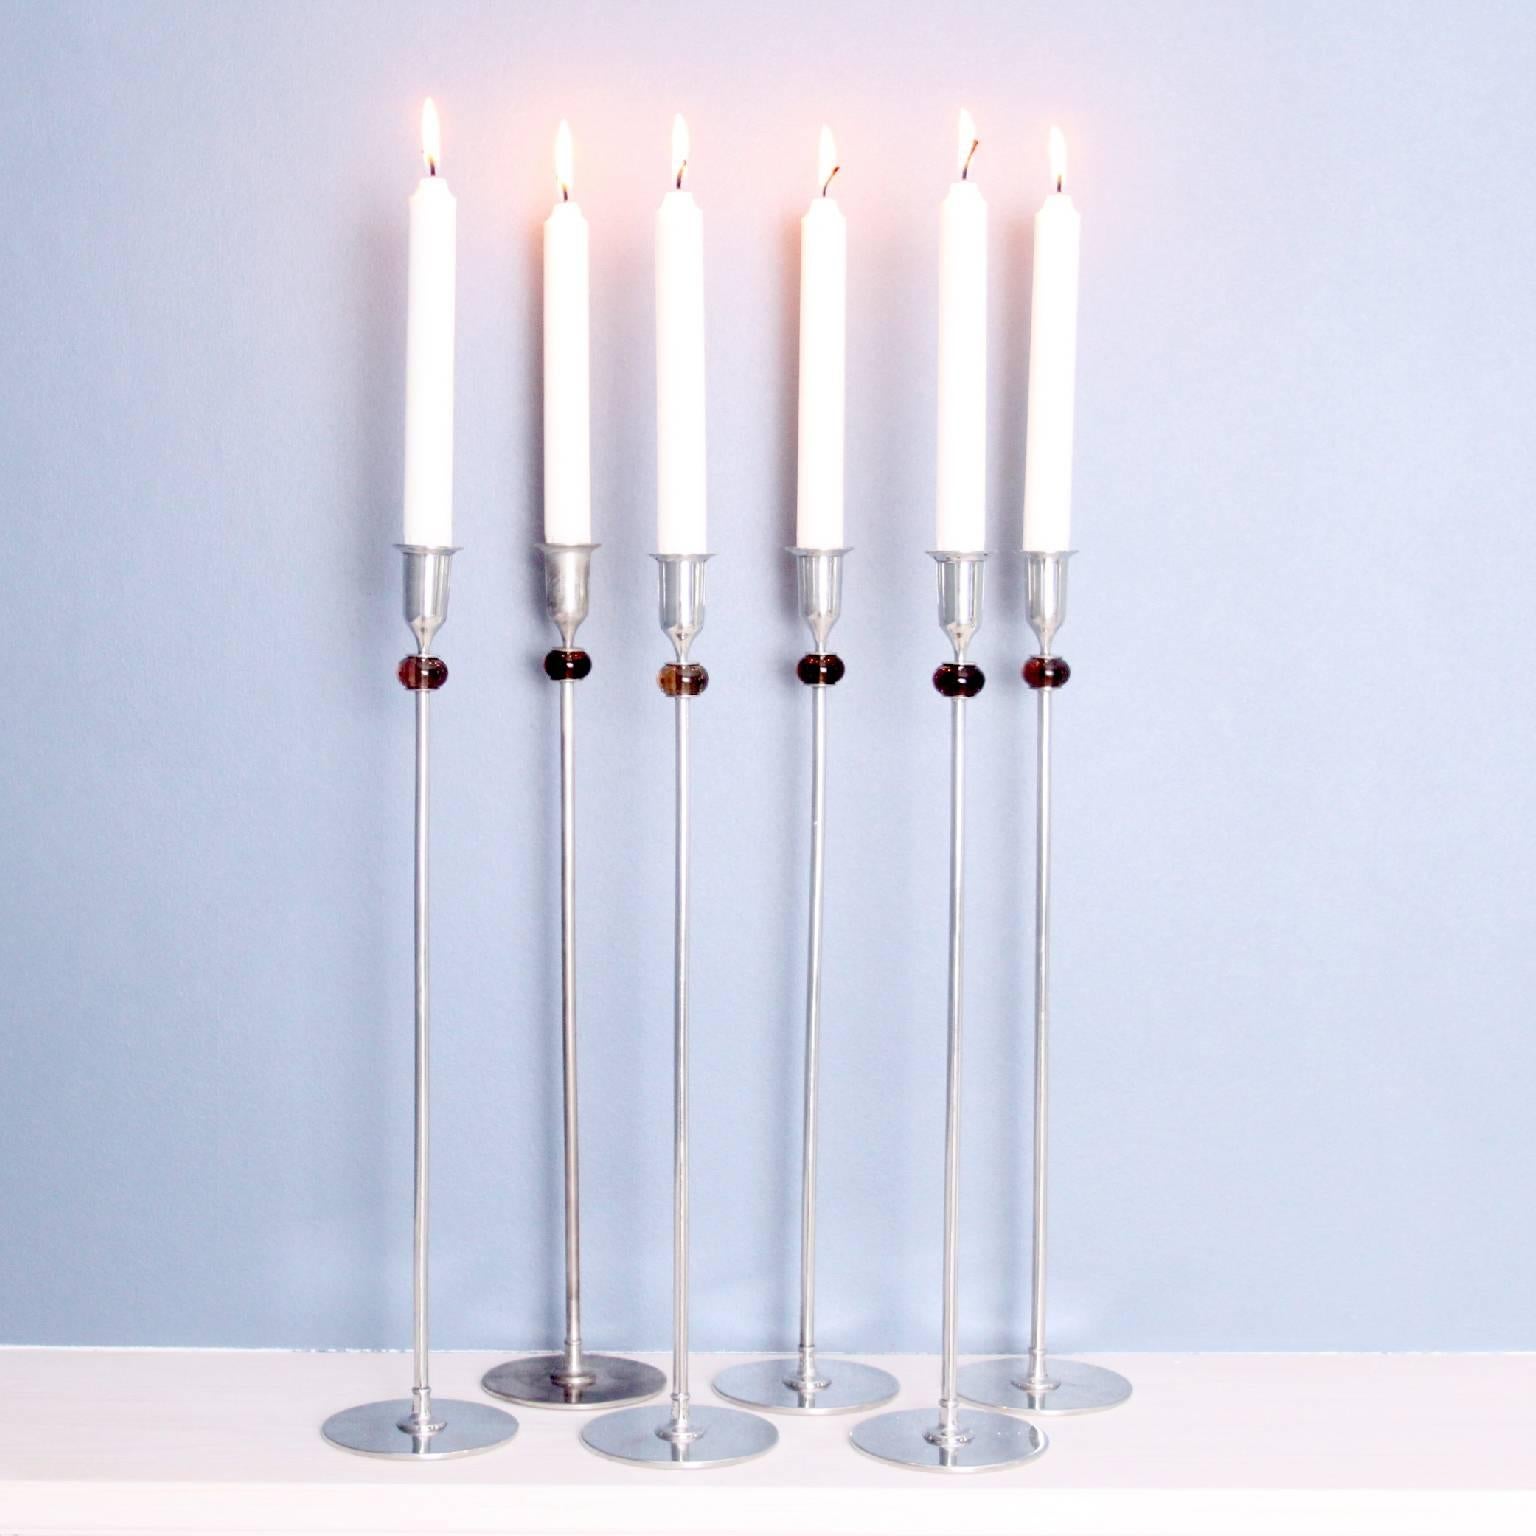 Collection of six candlesticks designed by Josef Frank.
Pewter, colored glass.
Each: 44.7 cm (17 1/2 in.) high.
Manufactured by Svenskt Tenn, Sweden, circa 1956.
Underside of each impressed with manufacturer’s angel mark.
Also sold individually